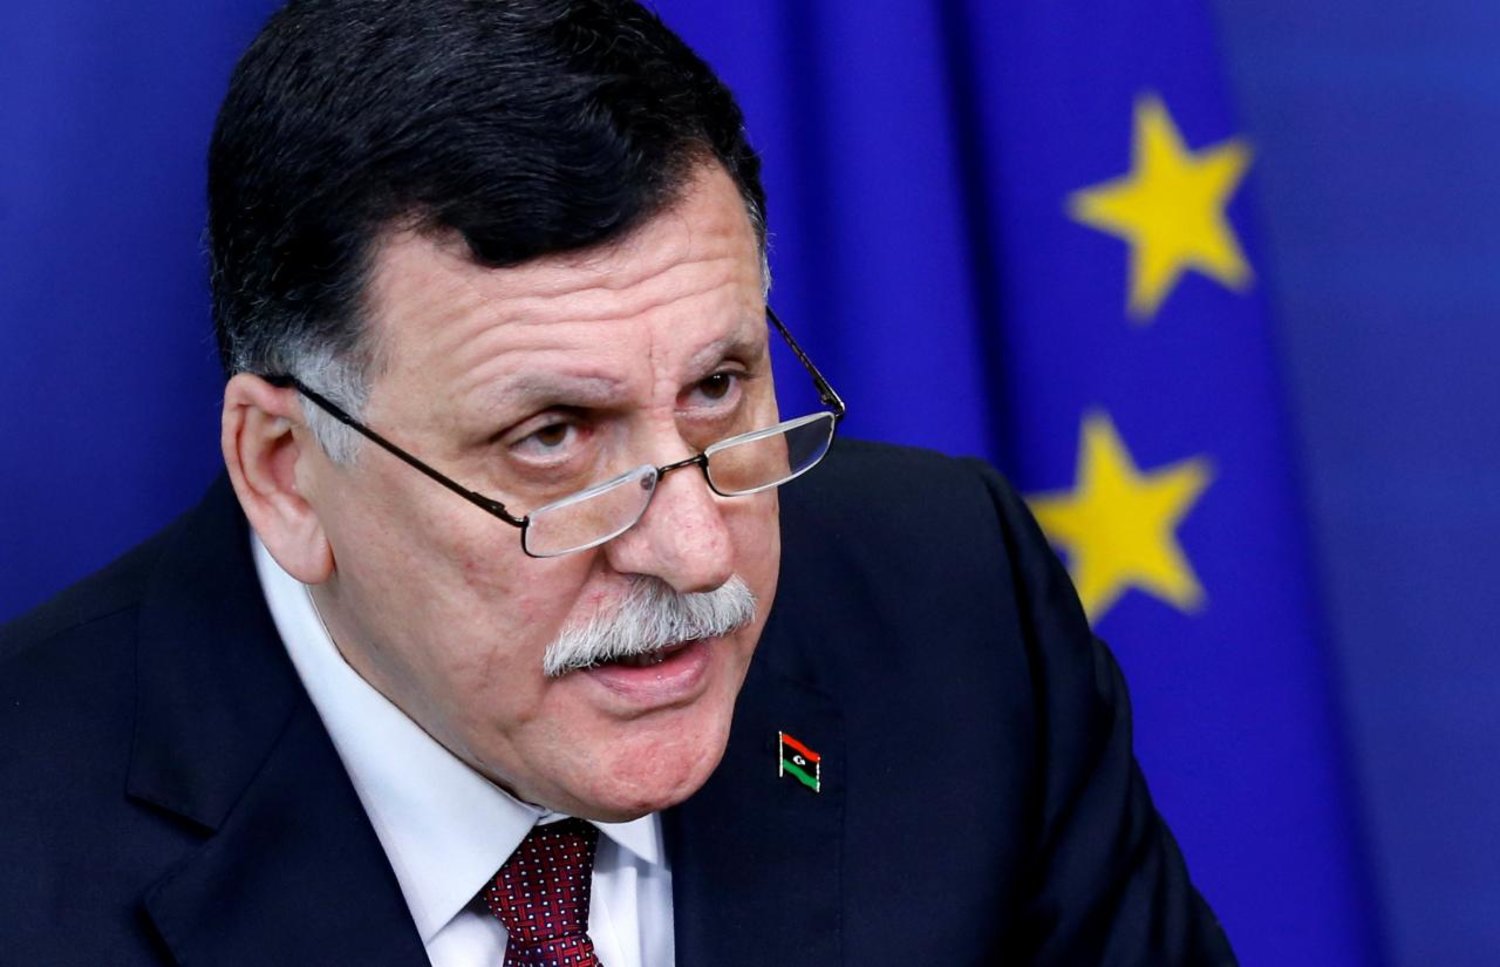 Libya's Prime Minister Fayez al-Sarraj addresses a joint news conference with European Union foreign policy chief Federica Mogherini (unseen), Reuters 